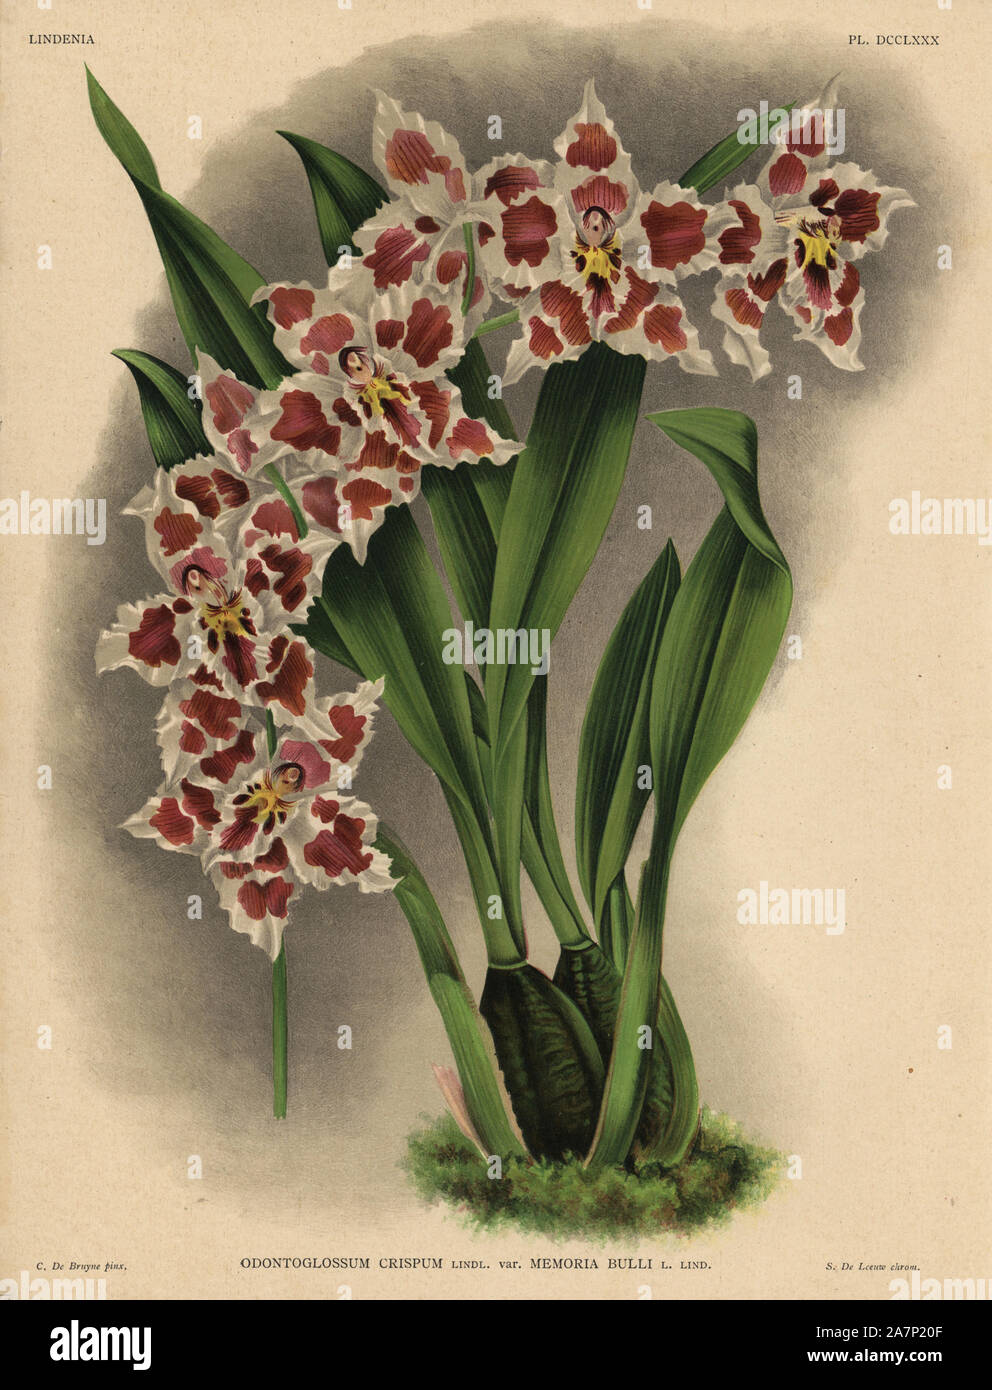 Memoria Bulli variety of Odontoglossum crispum orchid. Illustration drawn by C. de Bruyne and chromolithographed by S. de Leeuw from Lucien Linden's 'Lindenia, Iconographie des Orchidees,' Brussels, 1902. Stock Photo